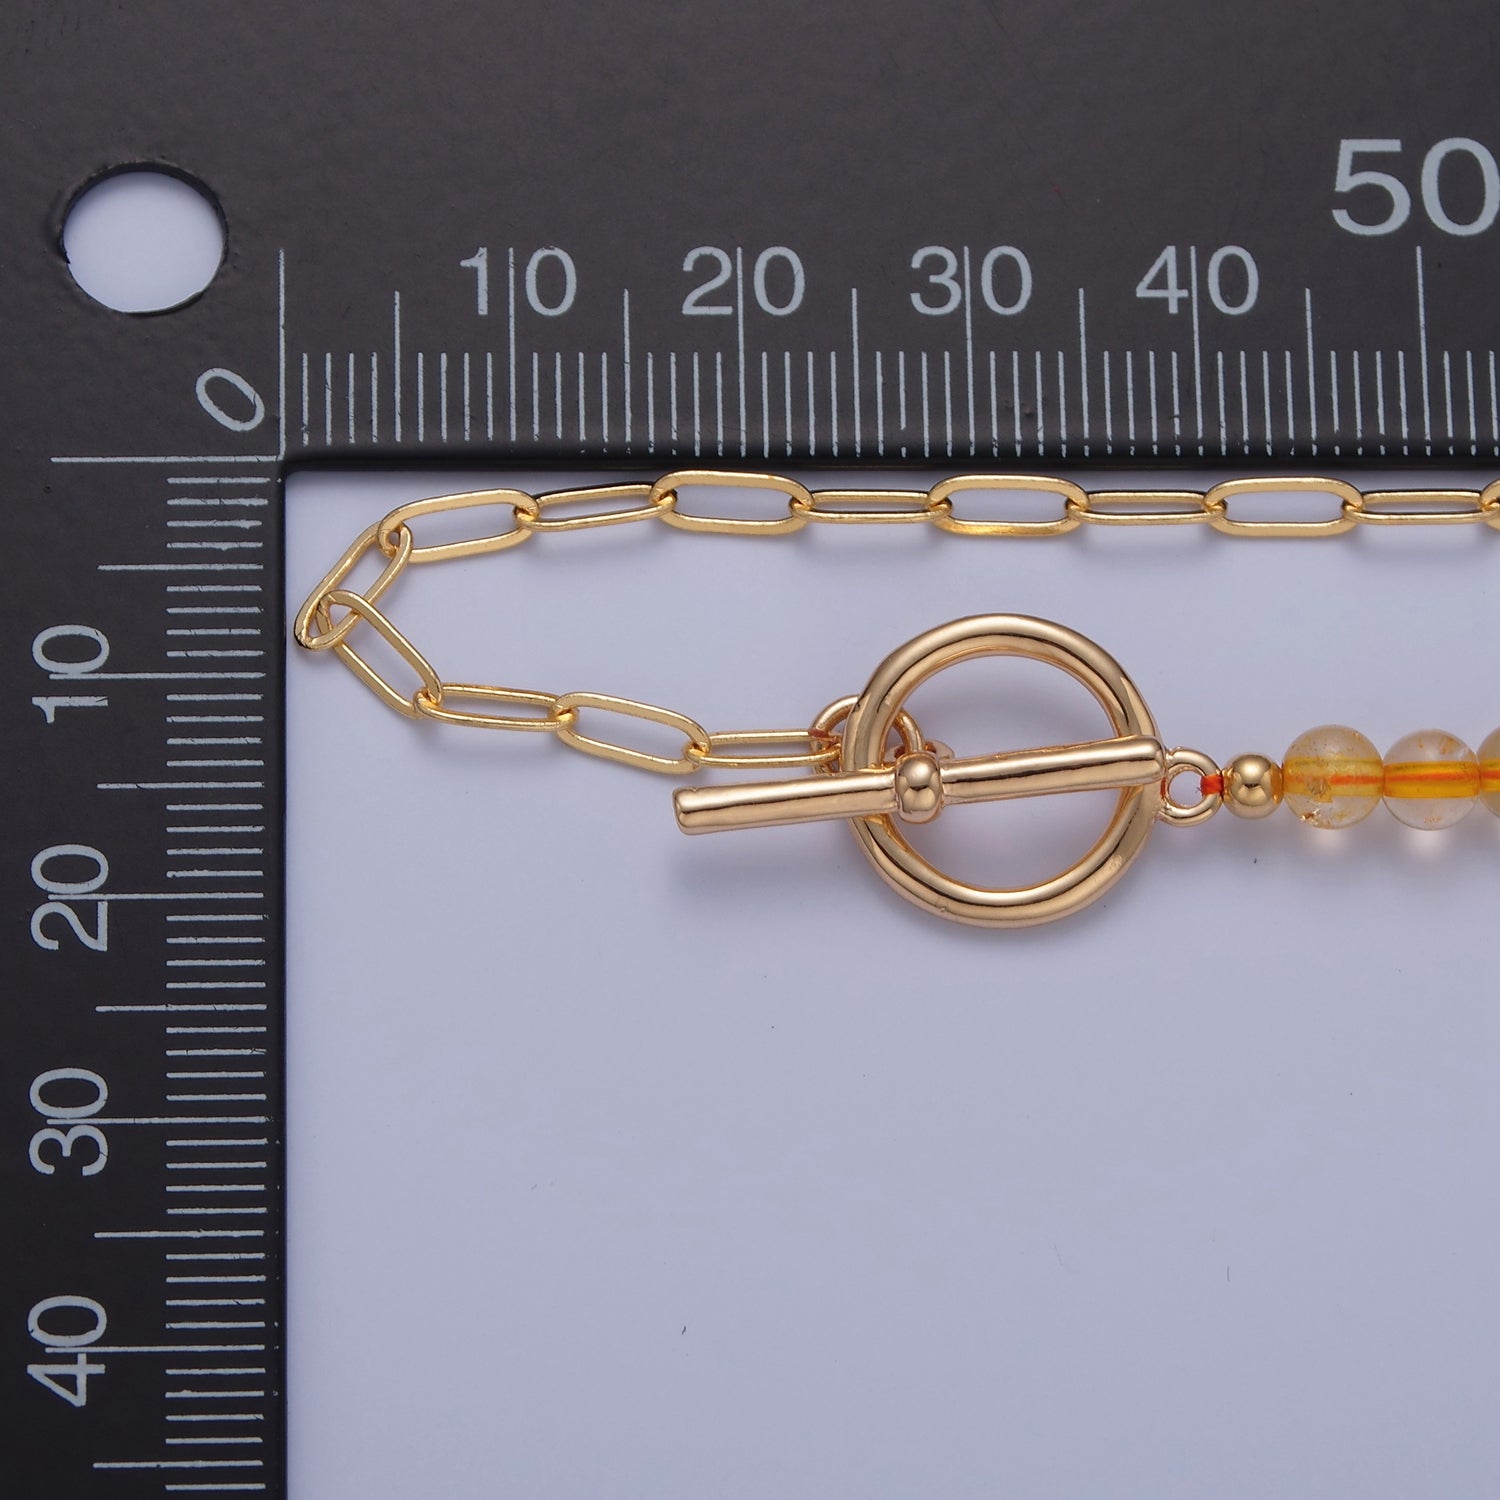 Dainty Half Bead Half Link Chain Necklace, 24k Gold Filled Paperclip Chain with Yellow Quartz Necklace WA-963 - DLUXCA